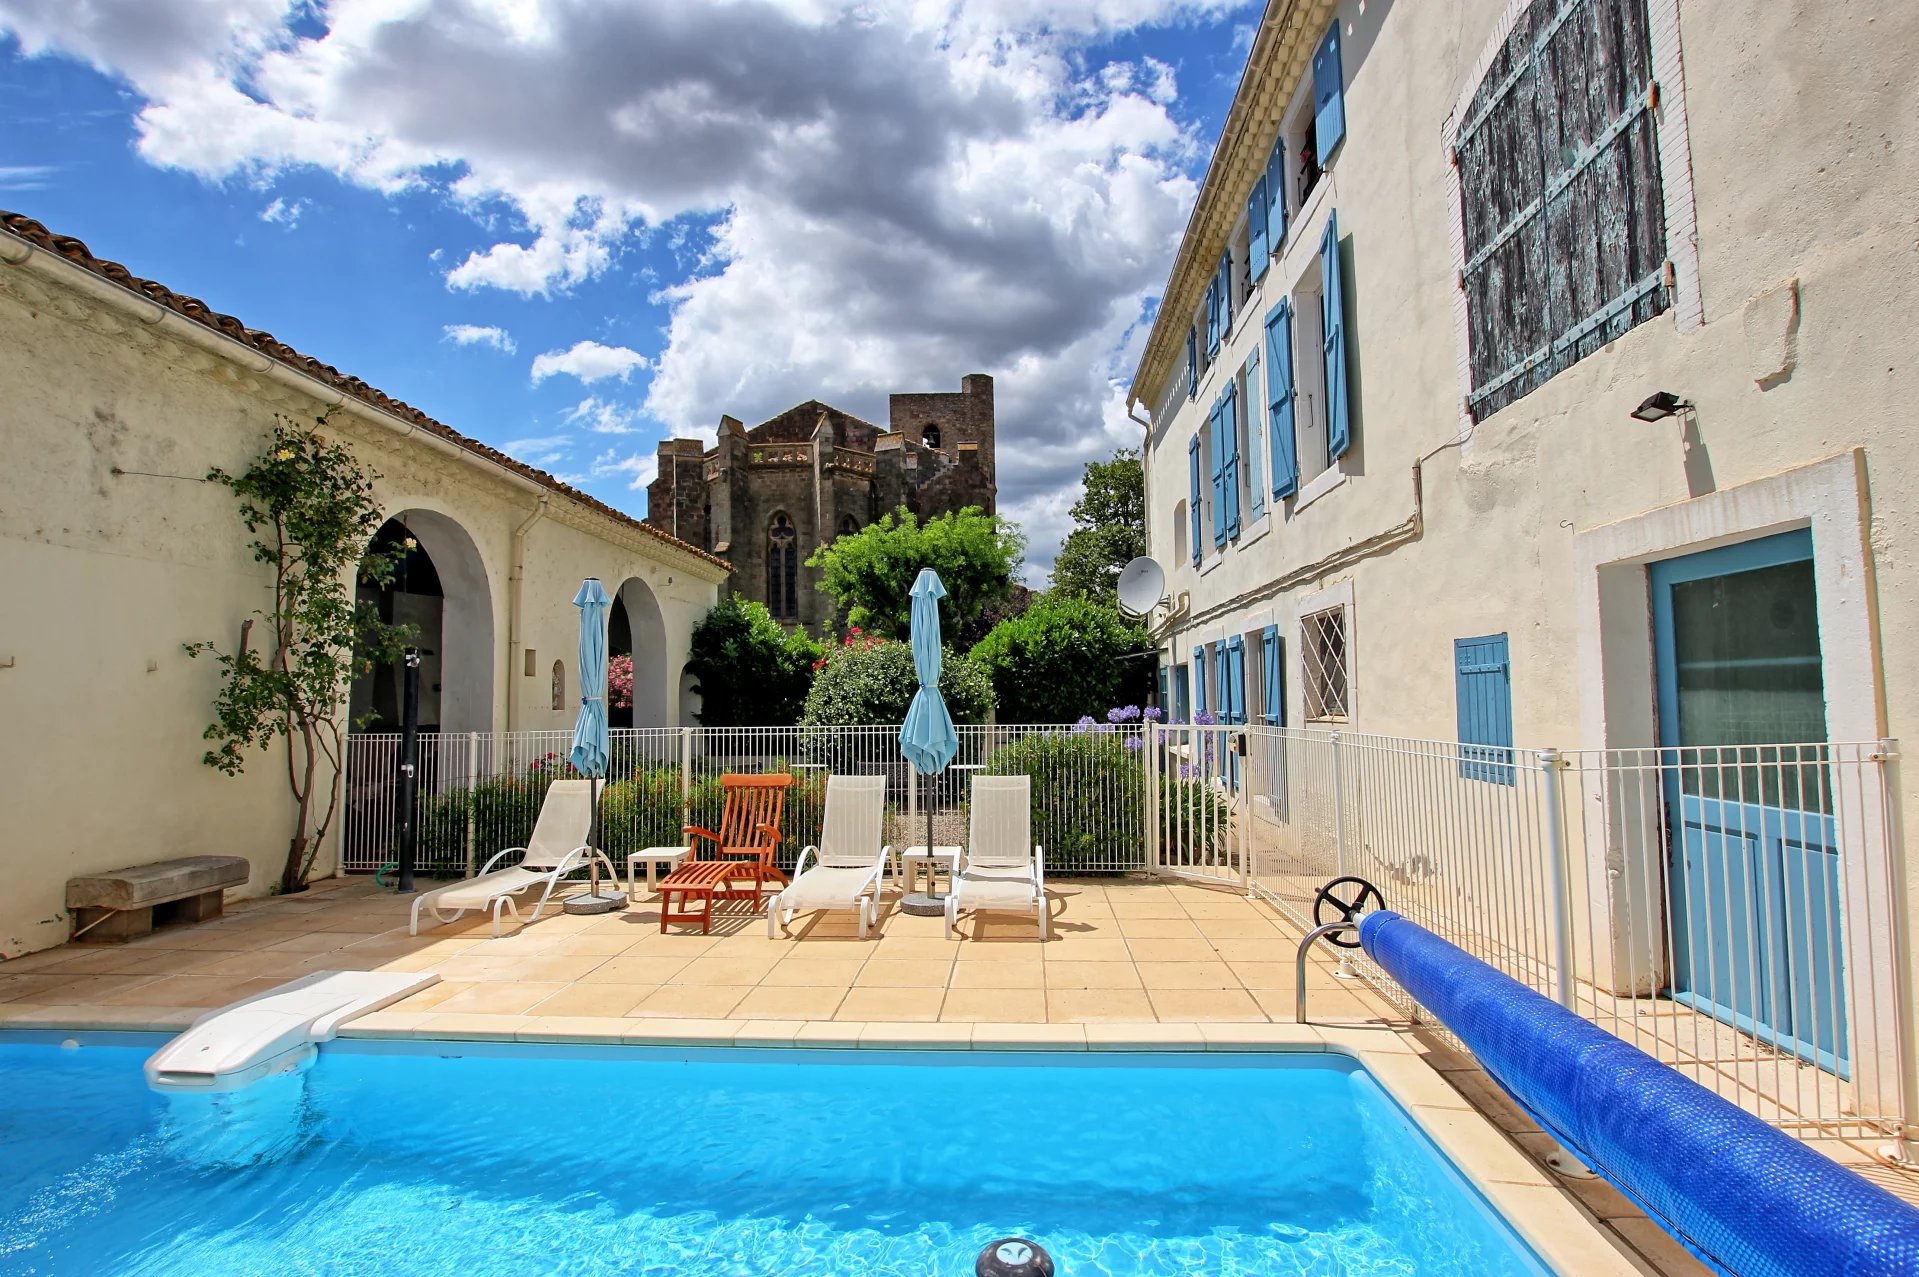 Large town house with pool, in centre of village with amenities